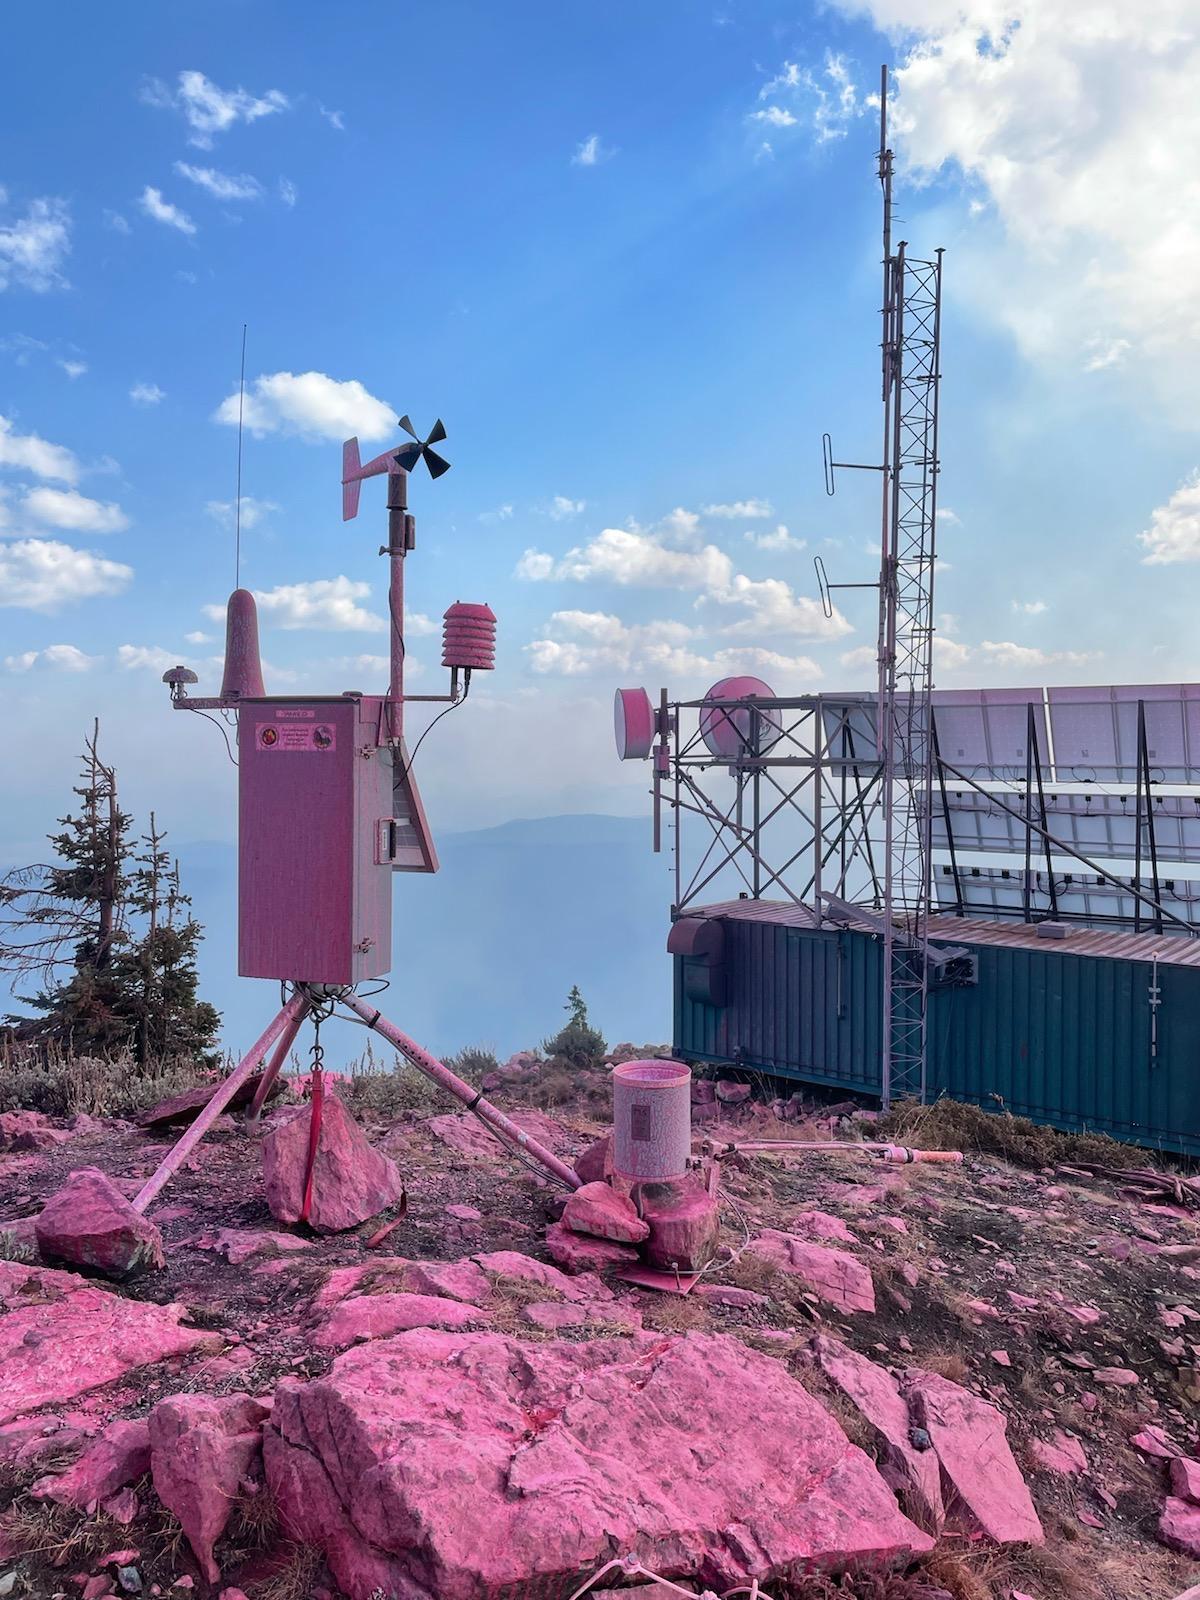 A retardant drop made Sept. 8 to protect the communications site on Calispell Peak from the Boulder Mountain Fire painted this Remote Automatic Weather Station pink.